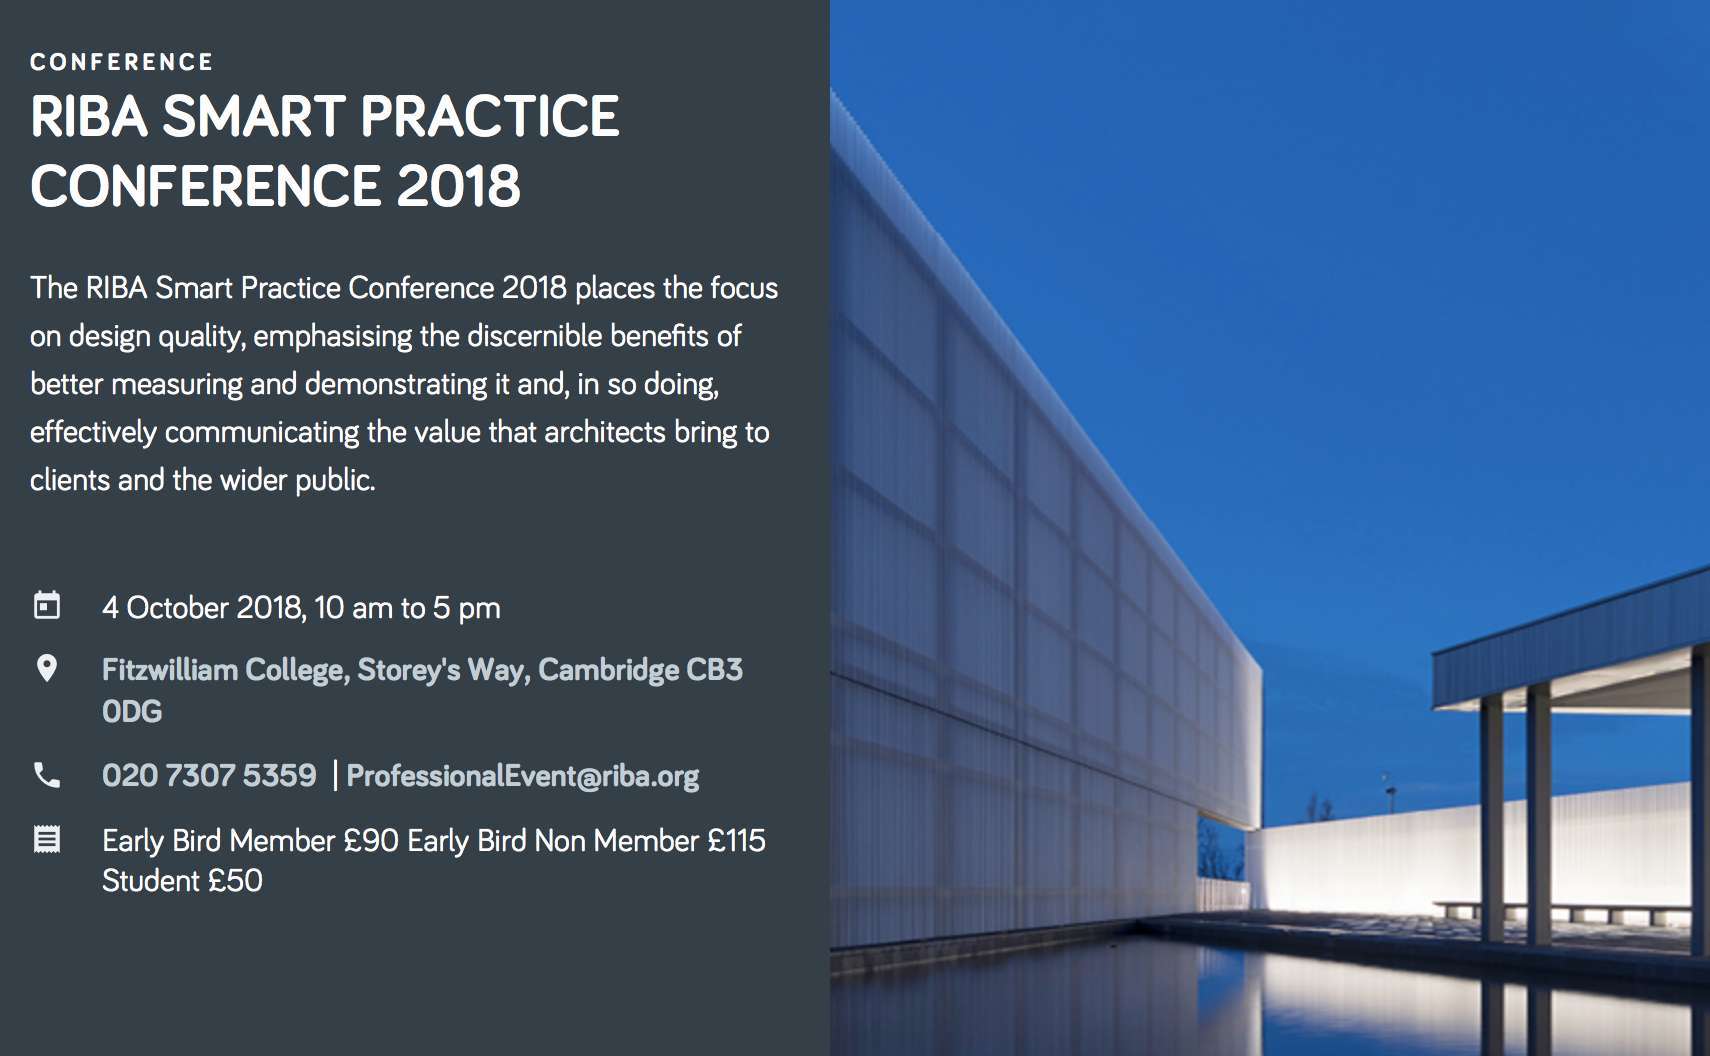 RIBA Smart Practice Conference 2018